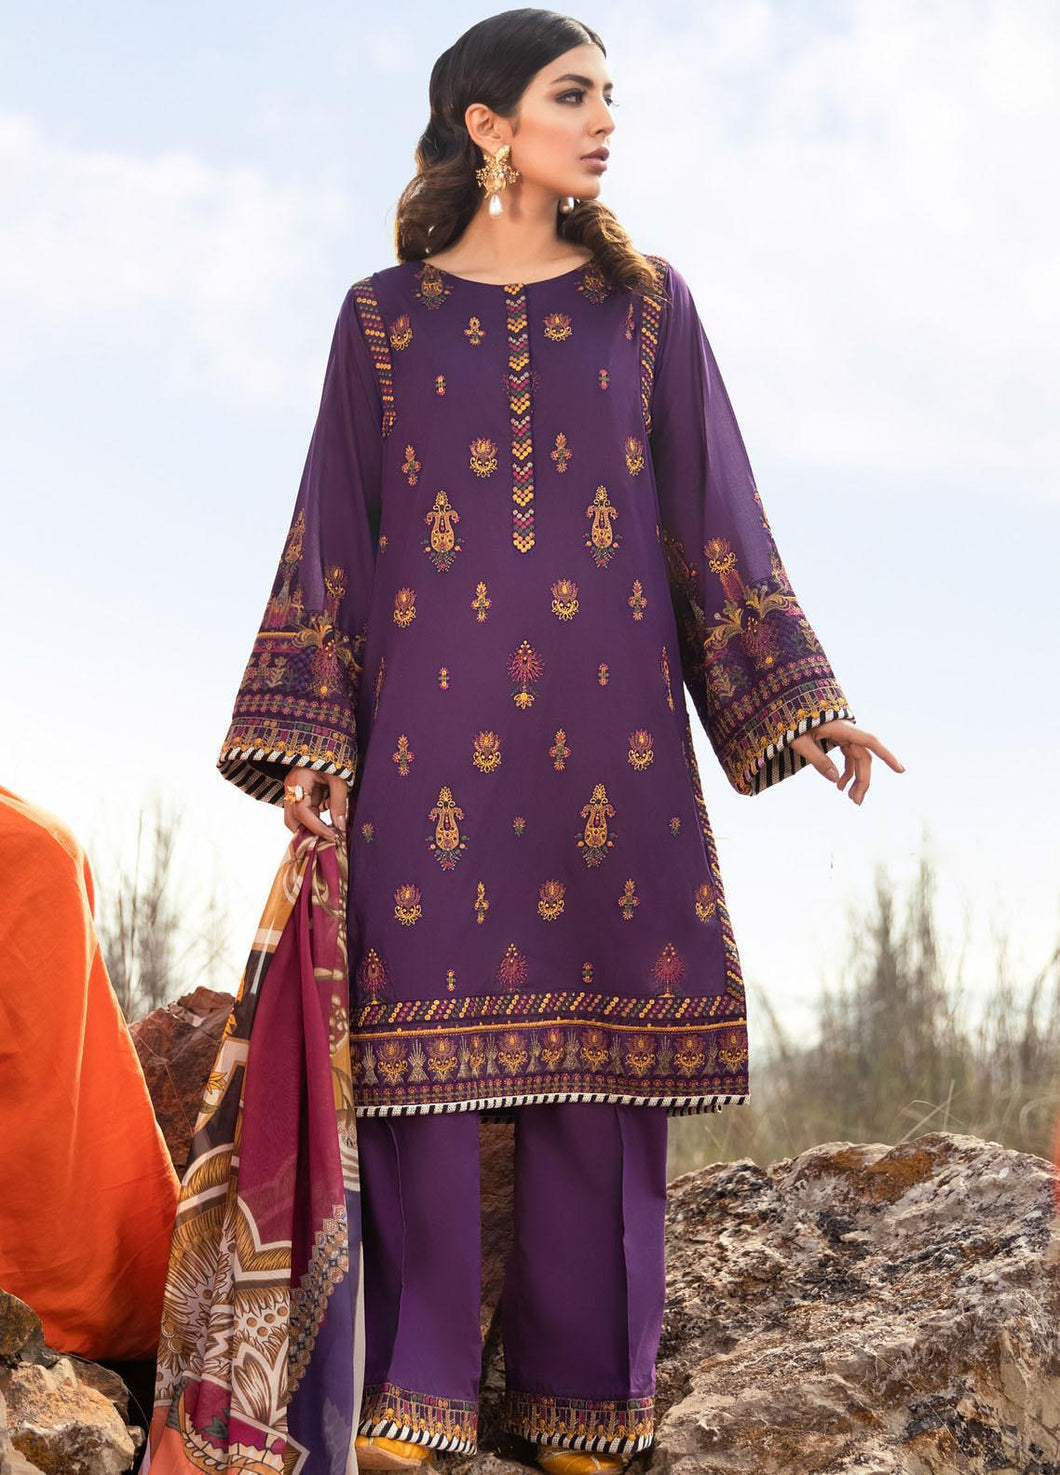 Buy Iznik Luxury Lawn 2021| Horizon | 03 Purple Dress at exclusive rates Buy unstitched or customized dresses of IZNIK LAWN 2021, MARIA B M PRINT OFFICIAL IMROZIA UNSTITCHED Gulal dresses of Evening wear, Party wear and NIKAH OUTFITS ASIAN PARTY WEAR Dresses can be available easily at USA & UK at best price in Sale!